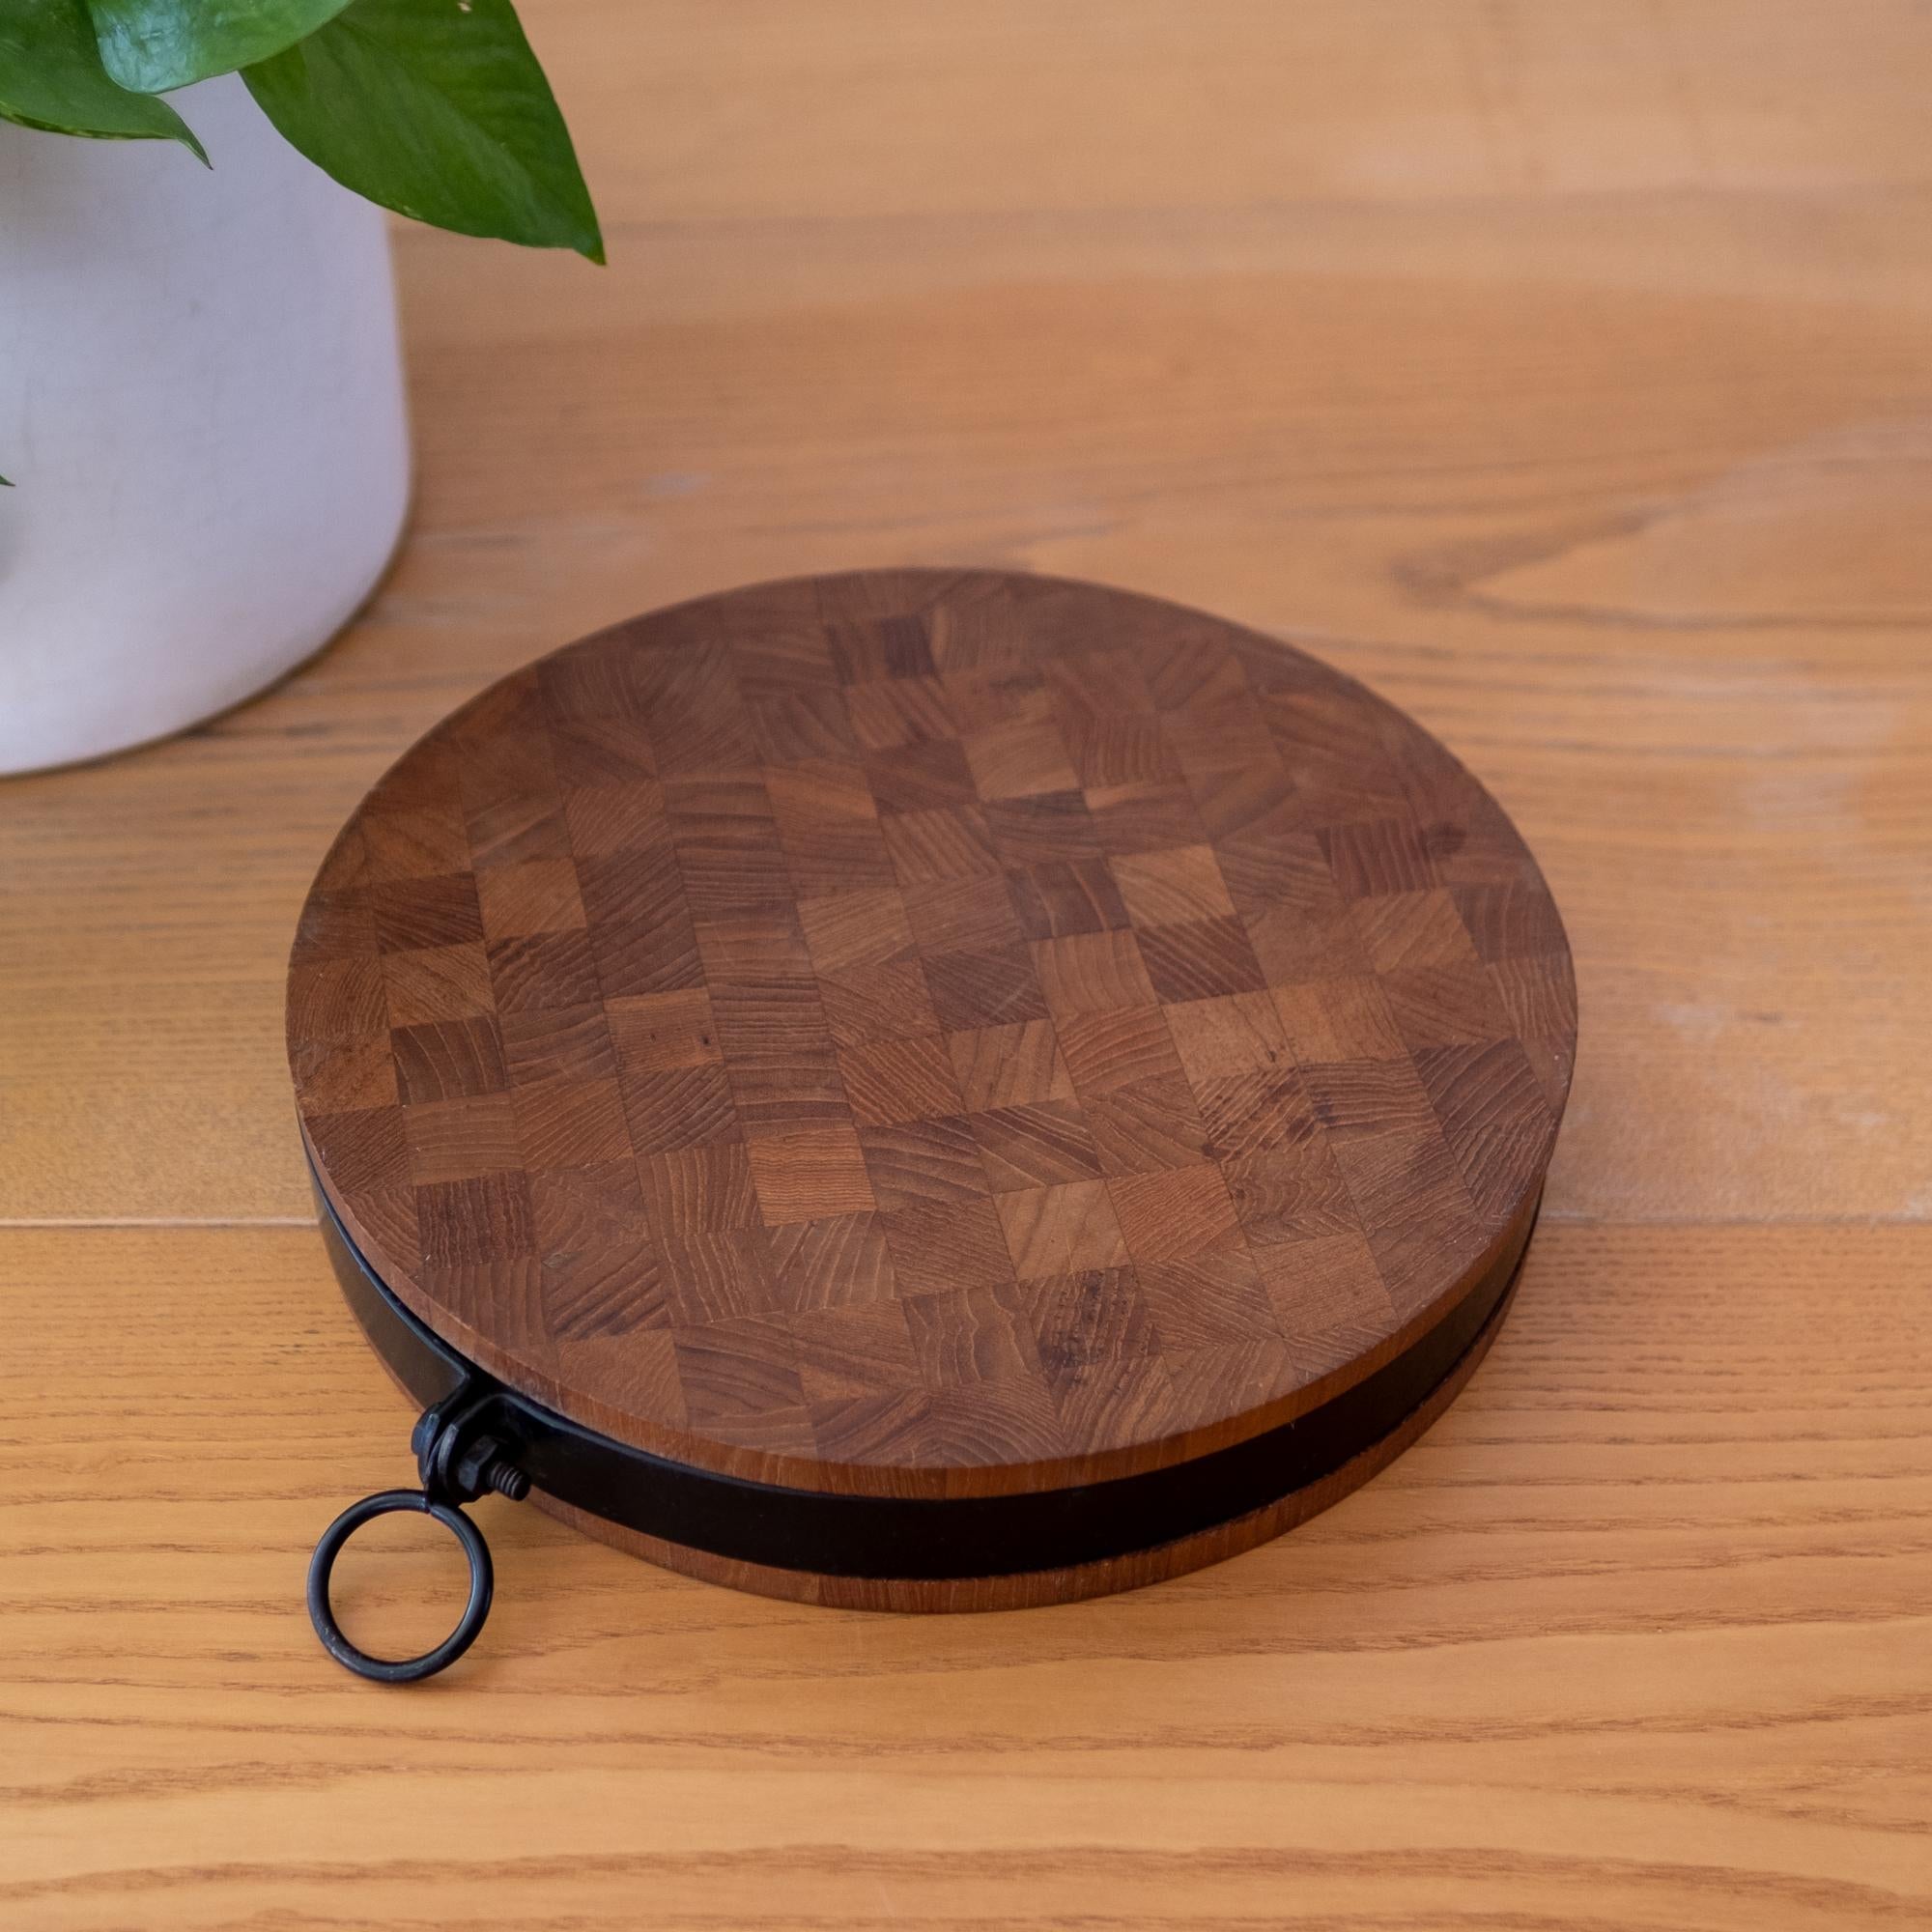 Teak hanging cutting board. Metal hoop and band around a thick dual sided teak butcher block board, Denmark, 1960s.